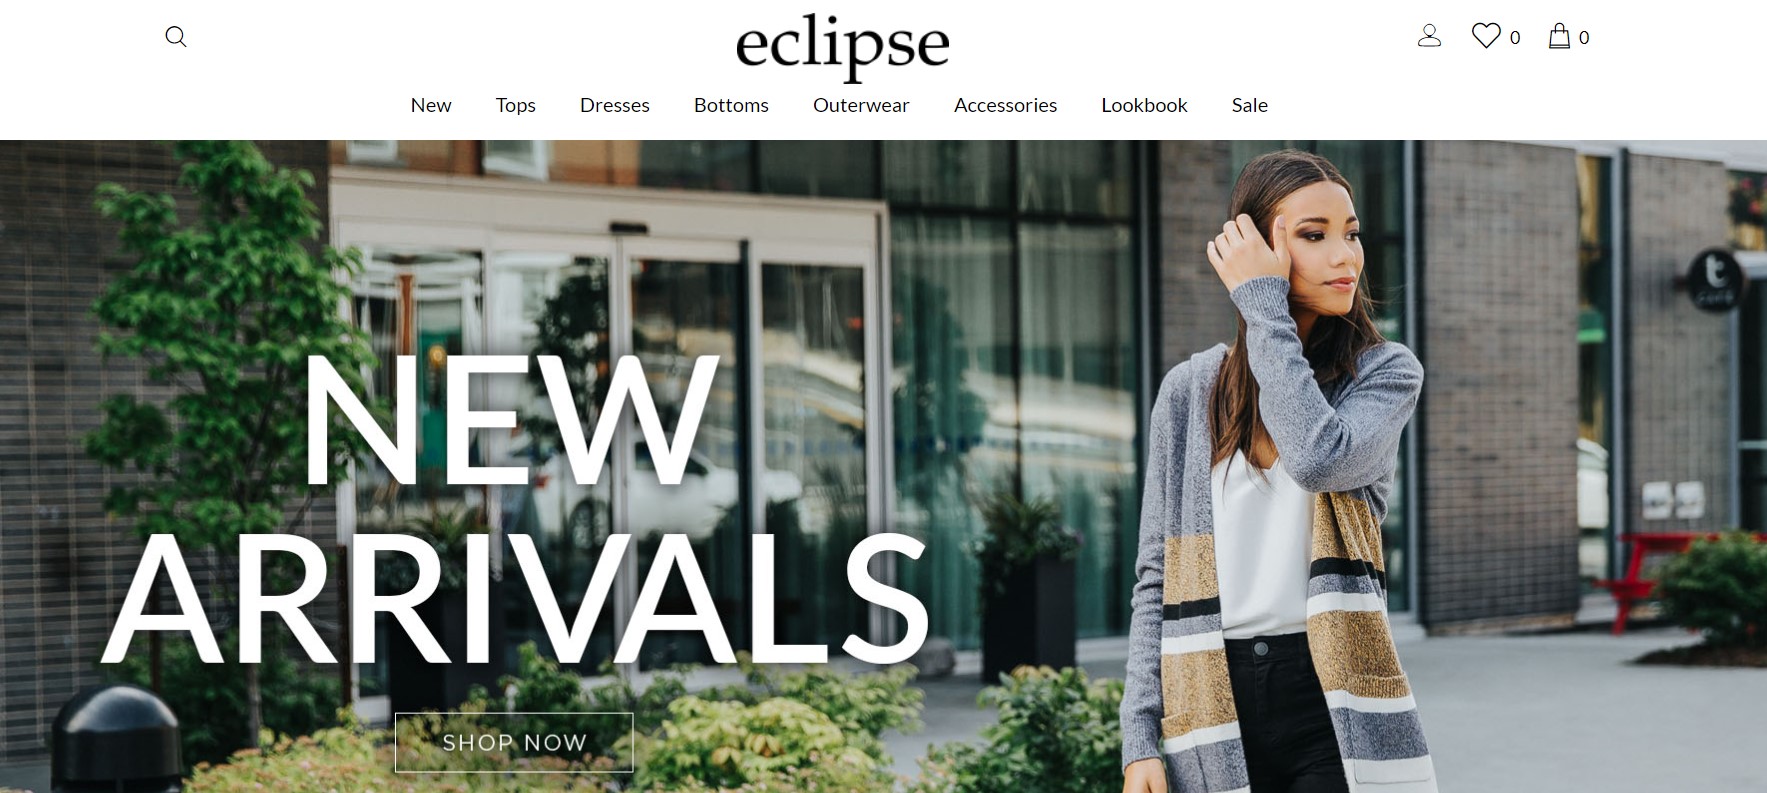 eclipse women's clothing stores in hamilton